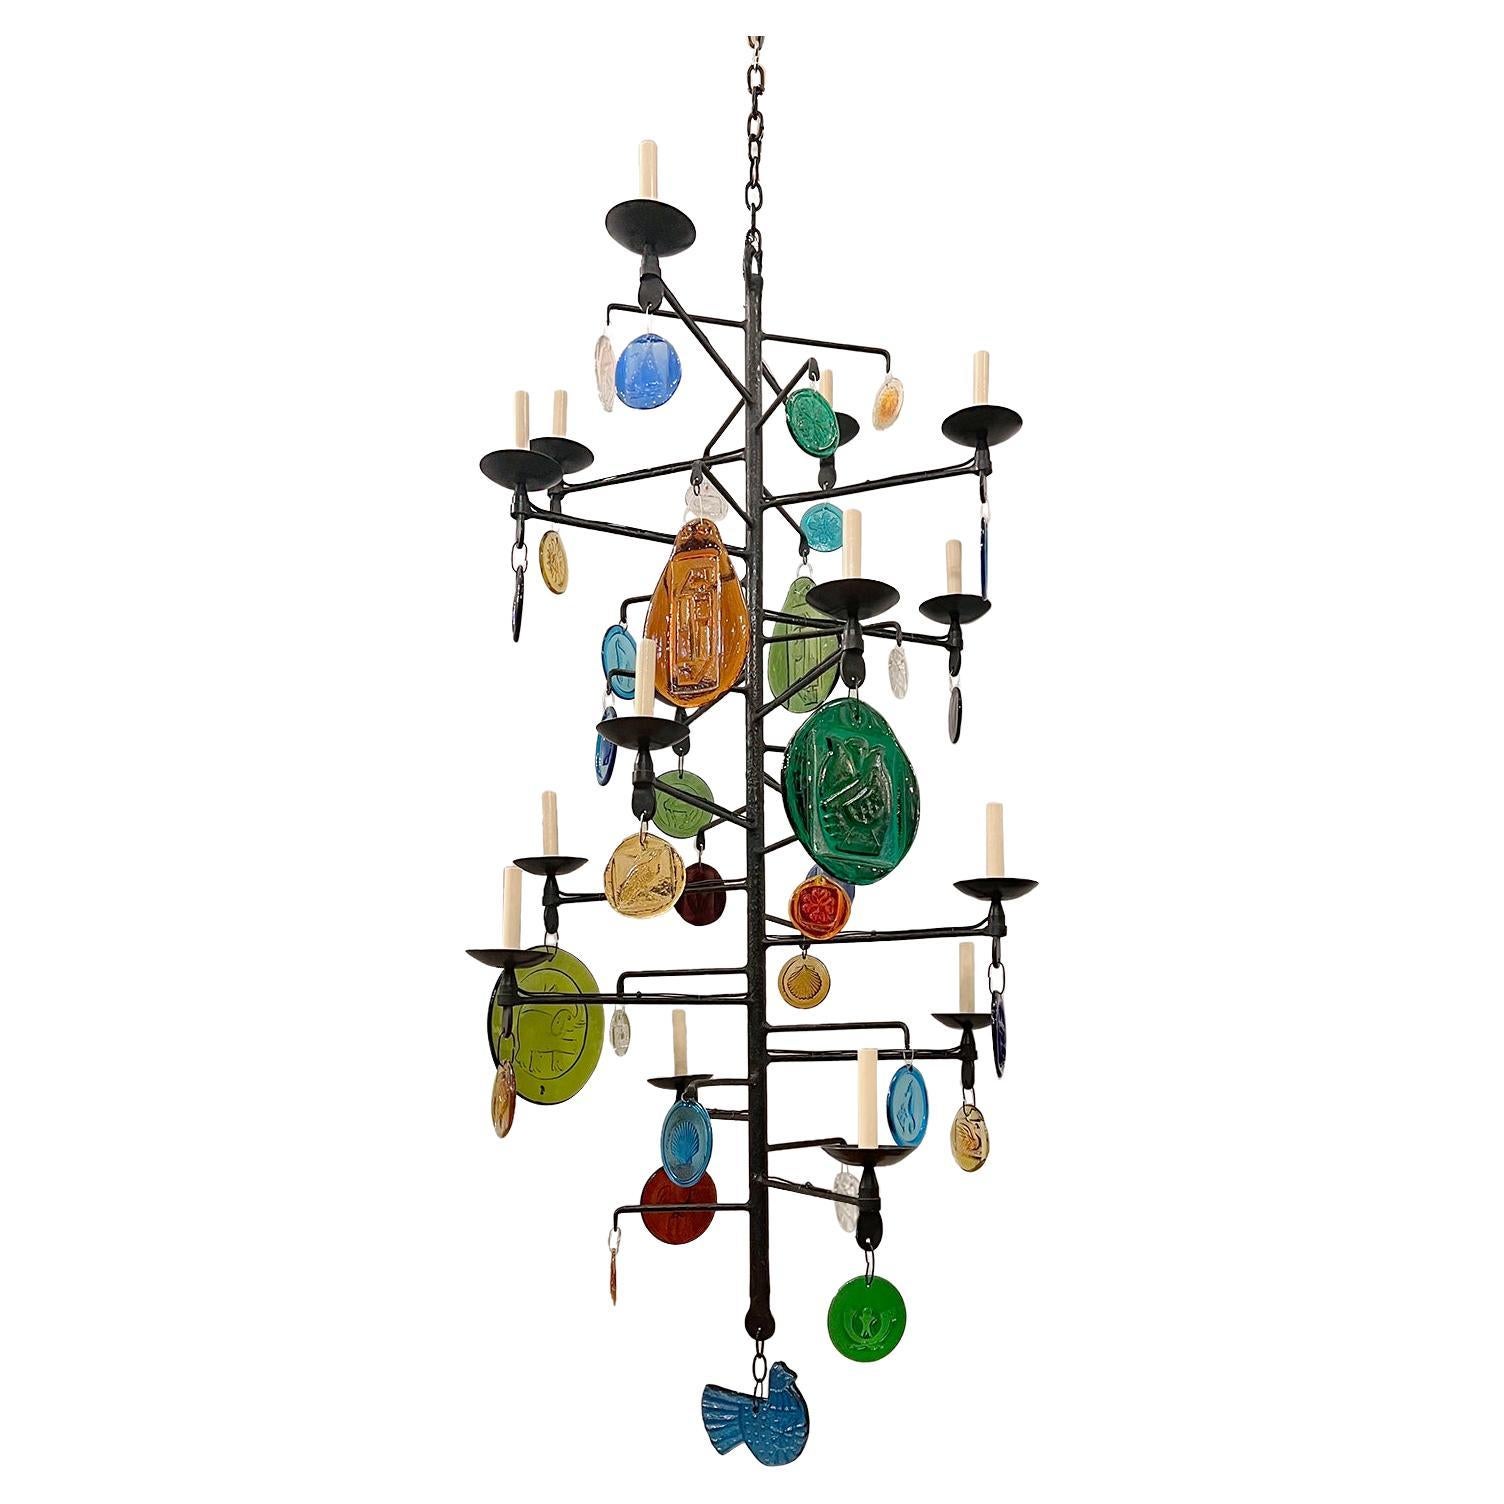 A Swedish circa 1970's large iron chandelier with glass pendants and 16 candelabra lights.

Measurements:
Minimum Drop: 78